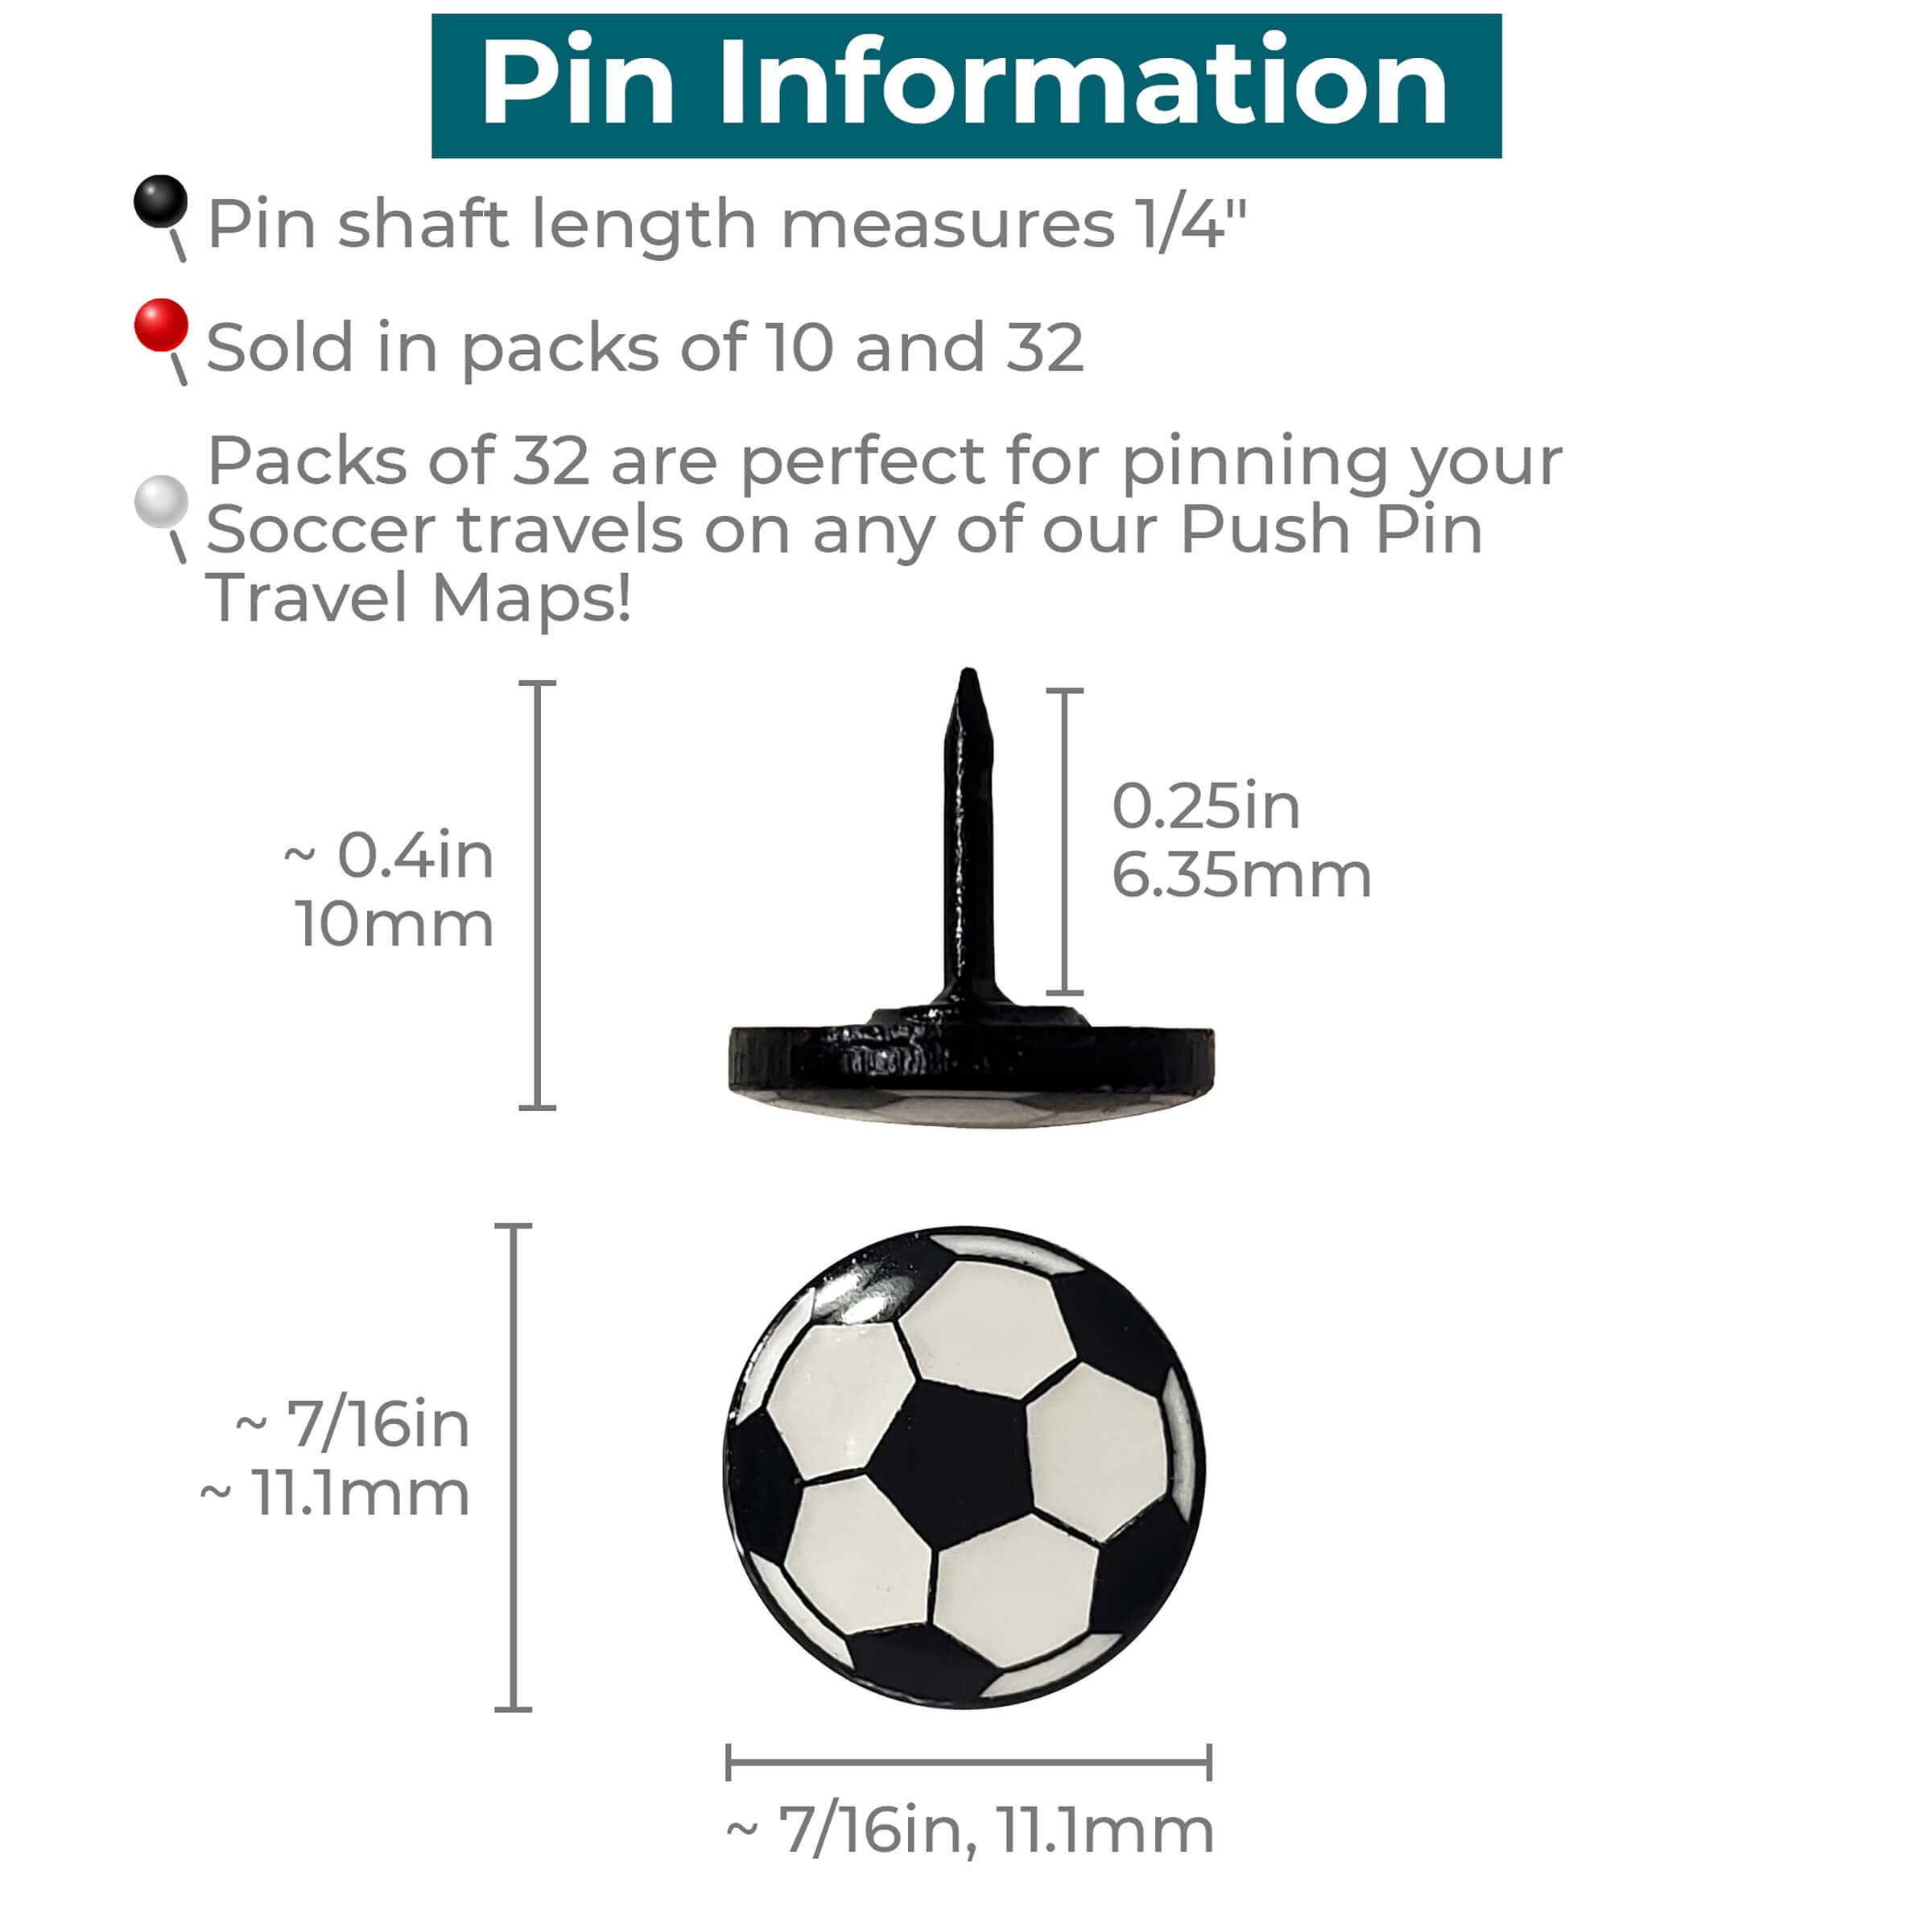 Gold or Silver Soccer Push Pins, Unique Nickel Sports Pushpin, Solid Metal  No Plastic, World Cup Soccer Map Pin 